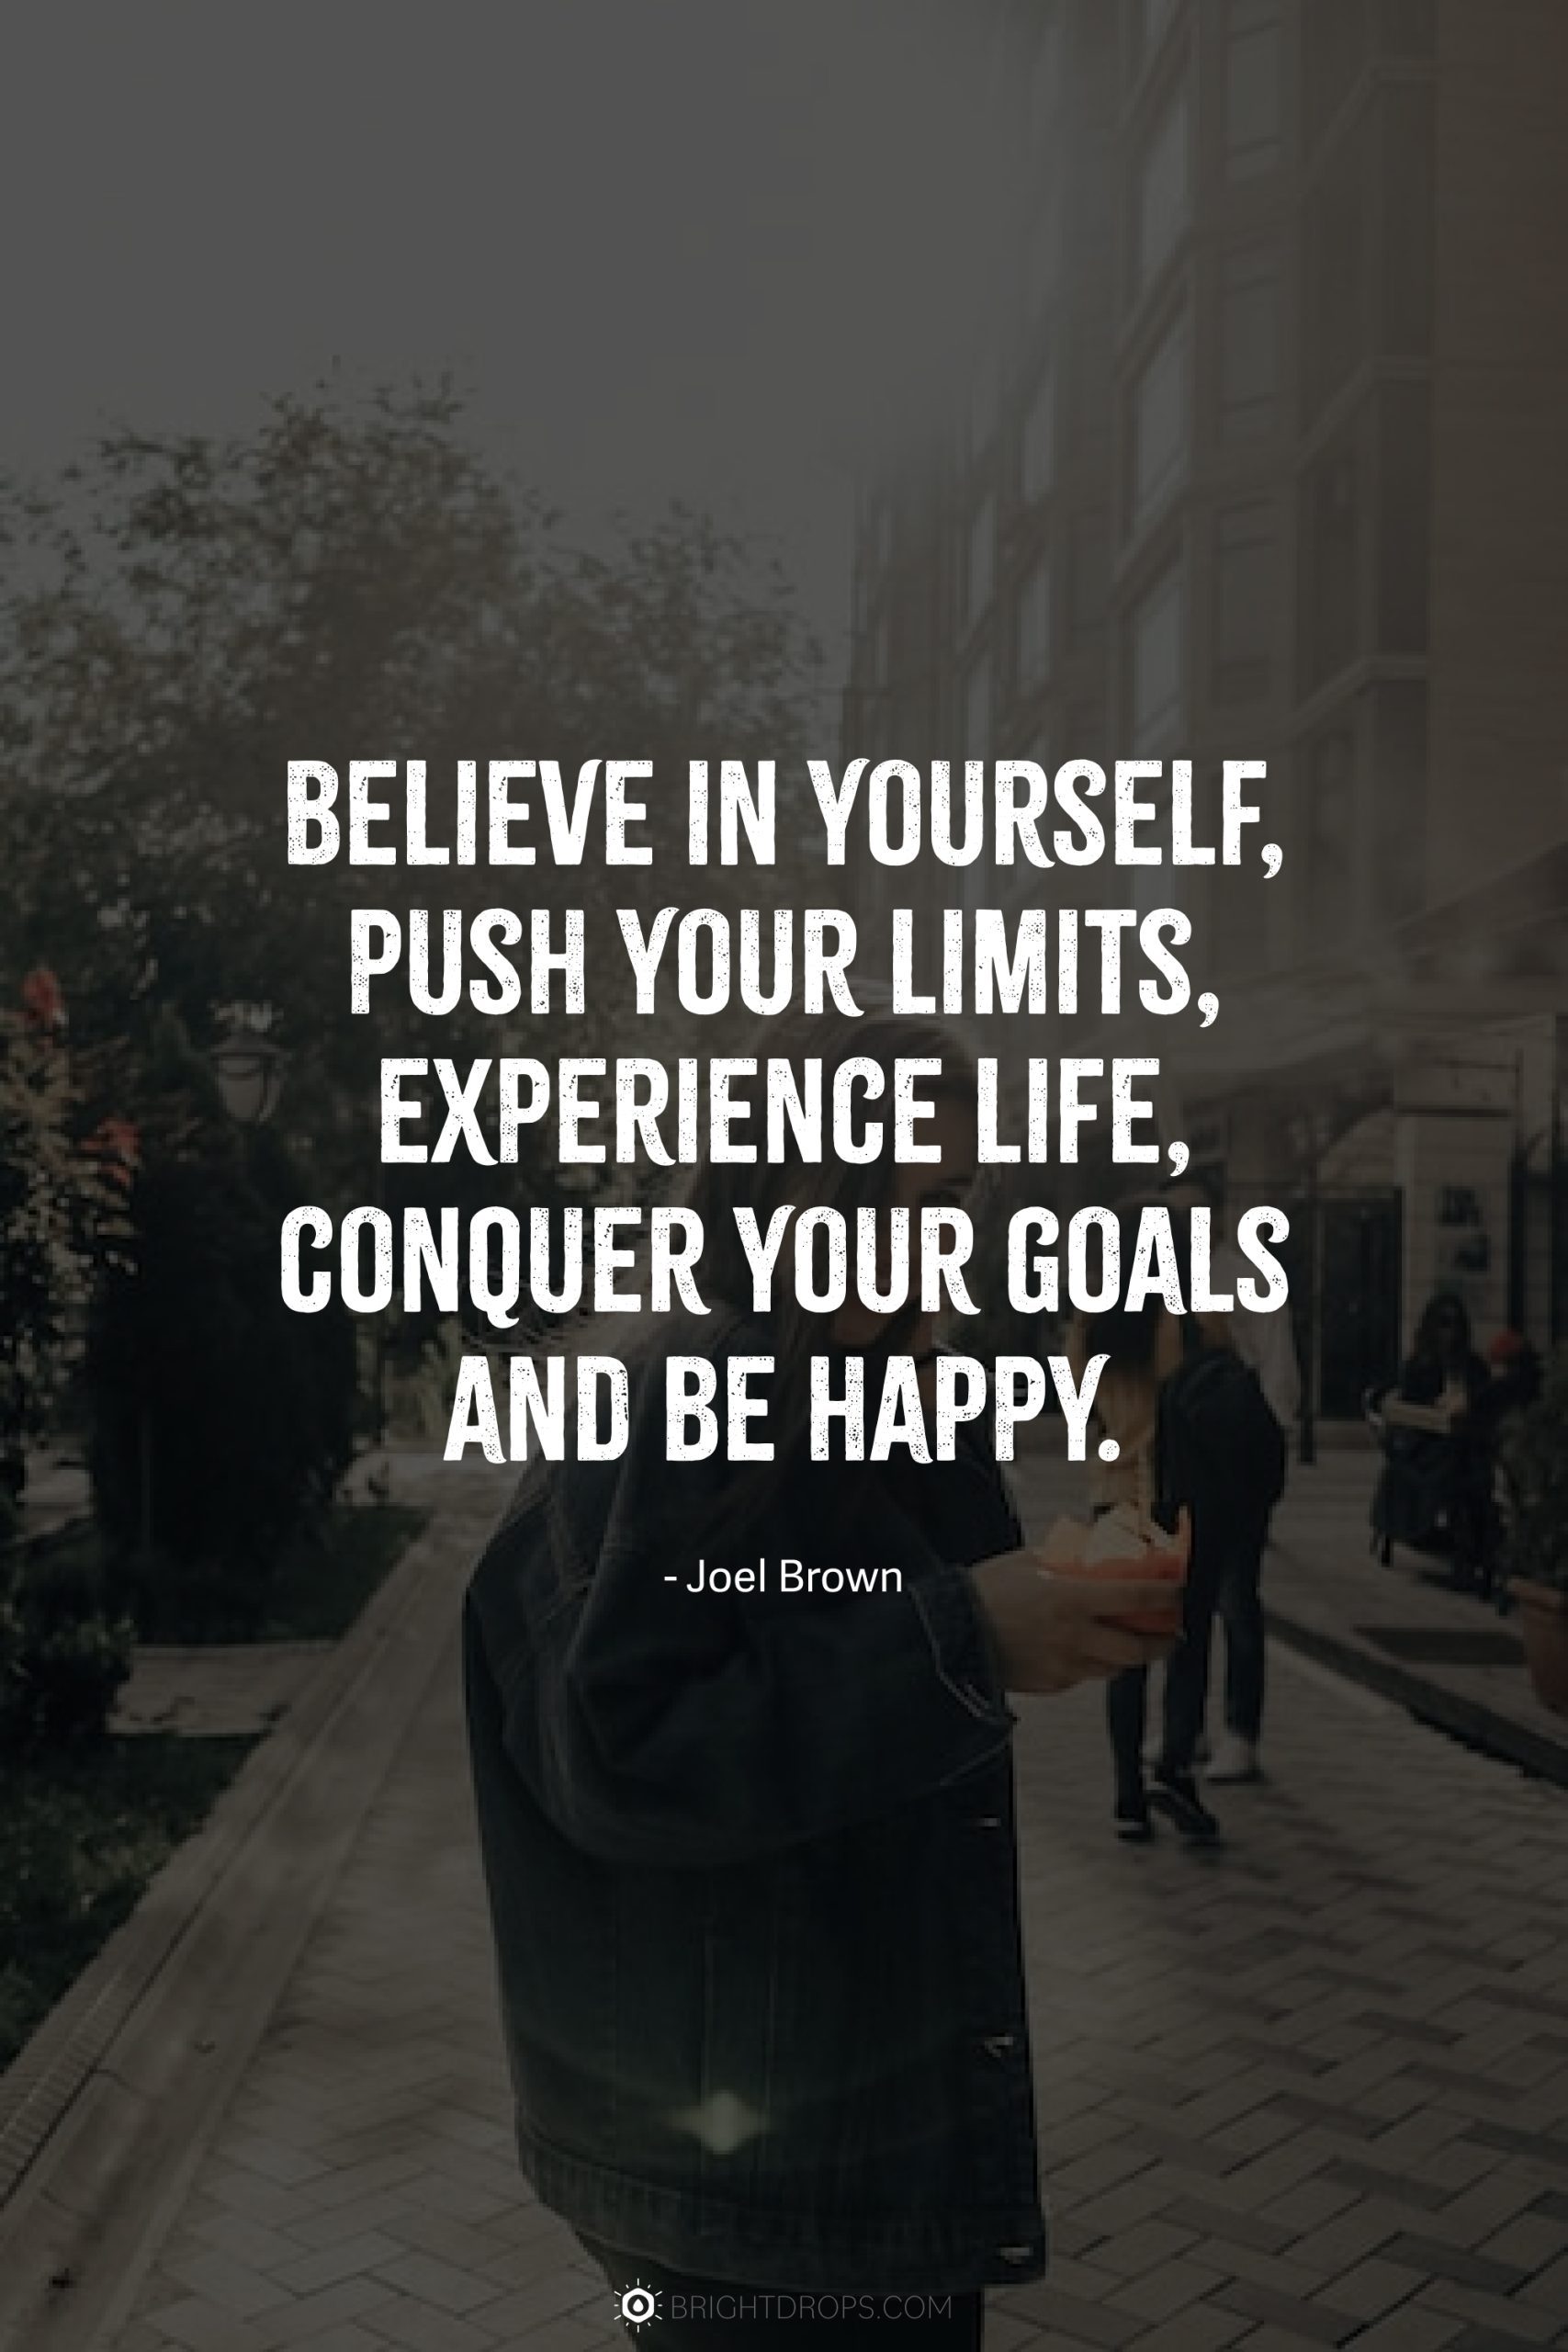 Believe in yourself, push your limits, experience life, conquer your goals and be happy.